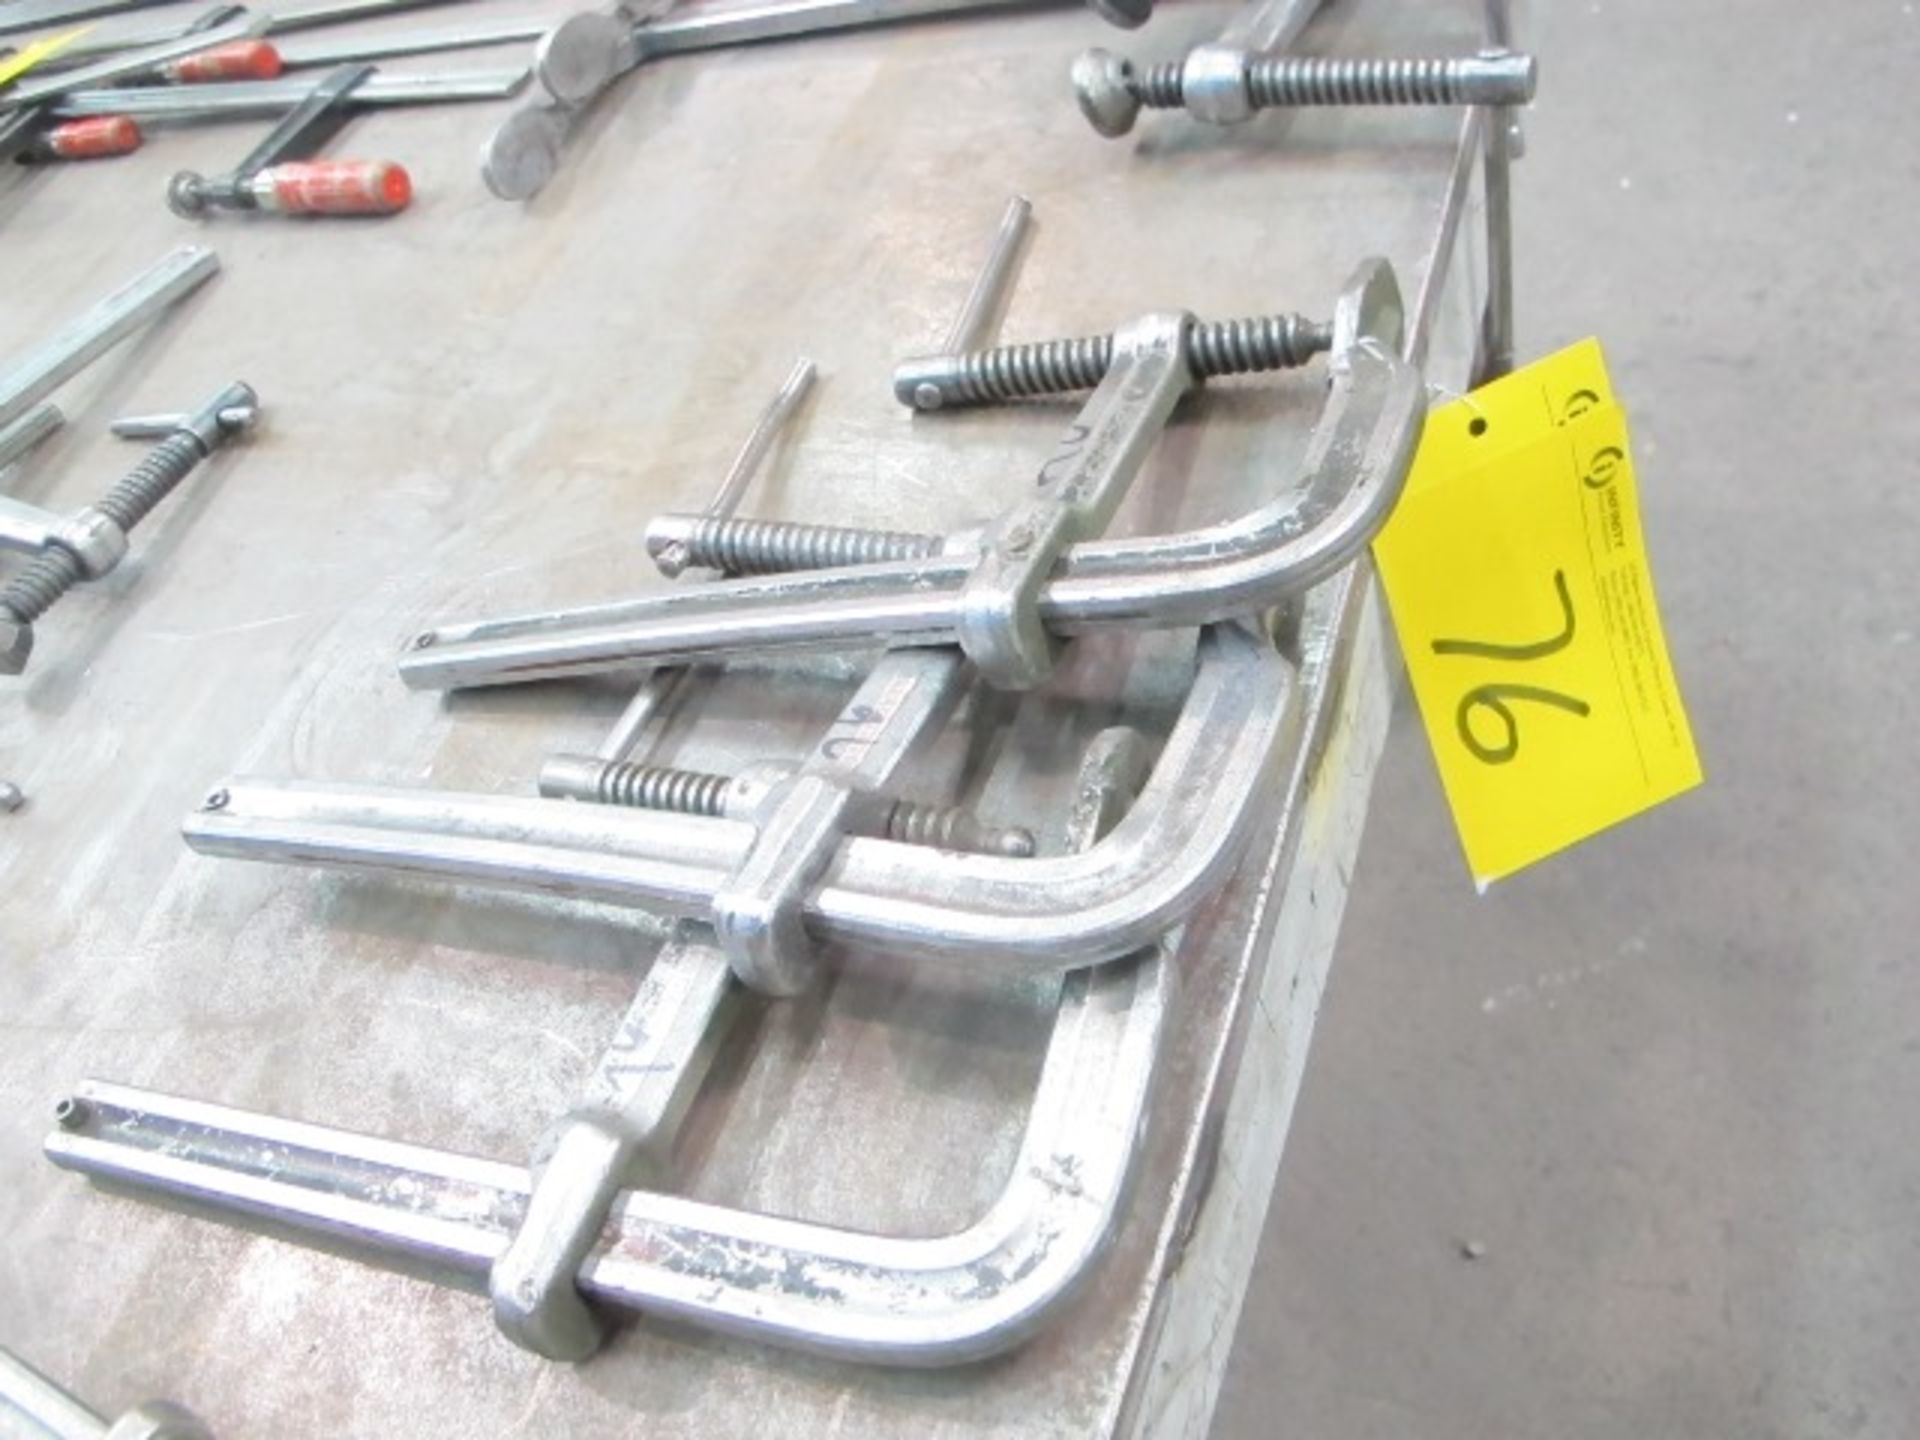 BAR CLAMPS 6" X 12"